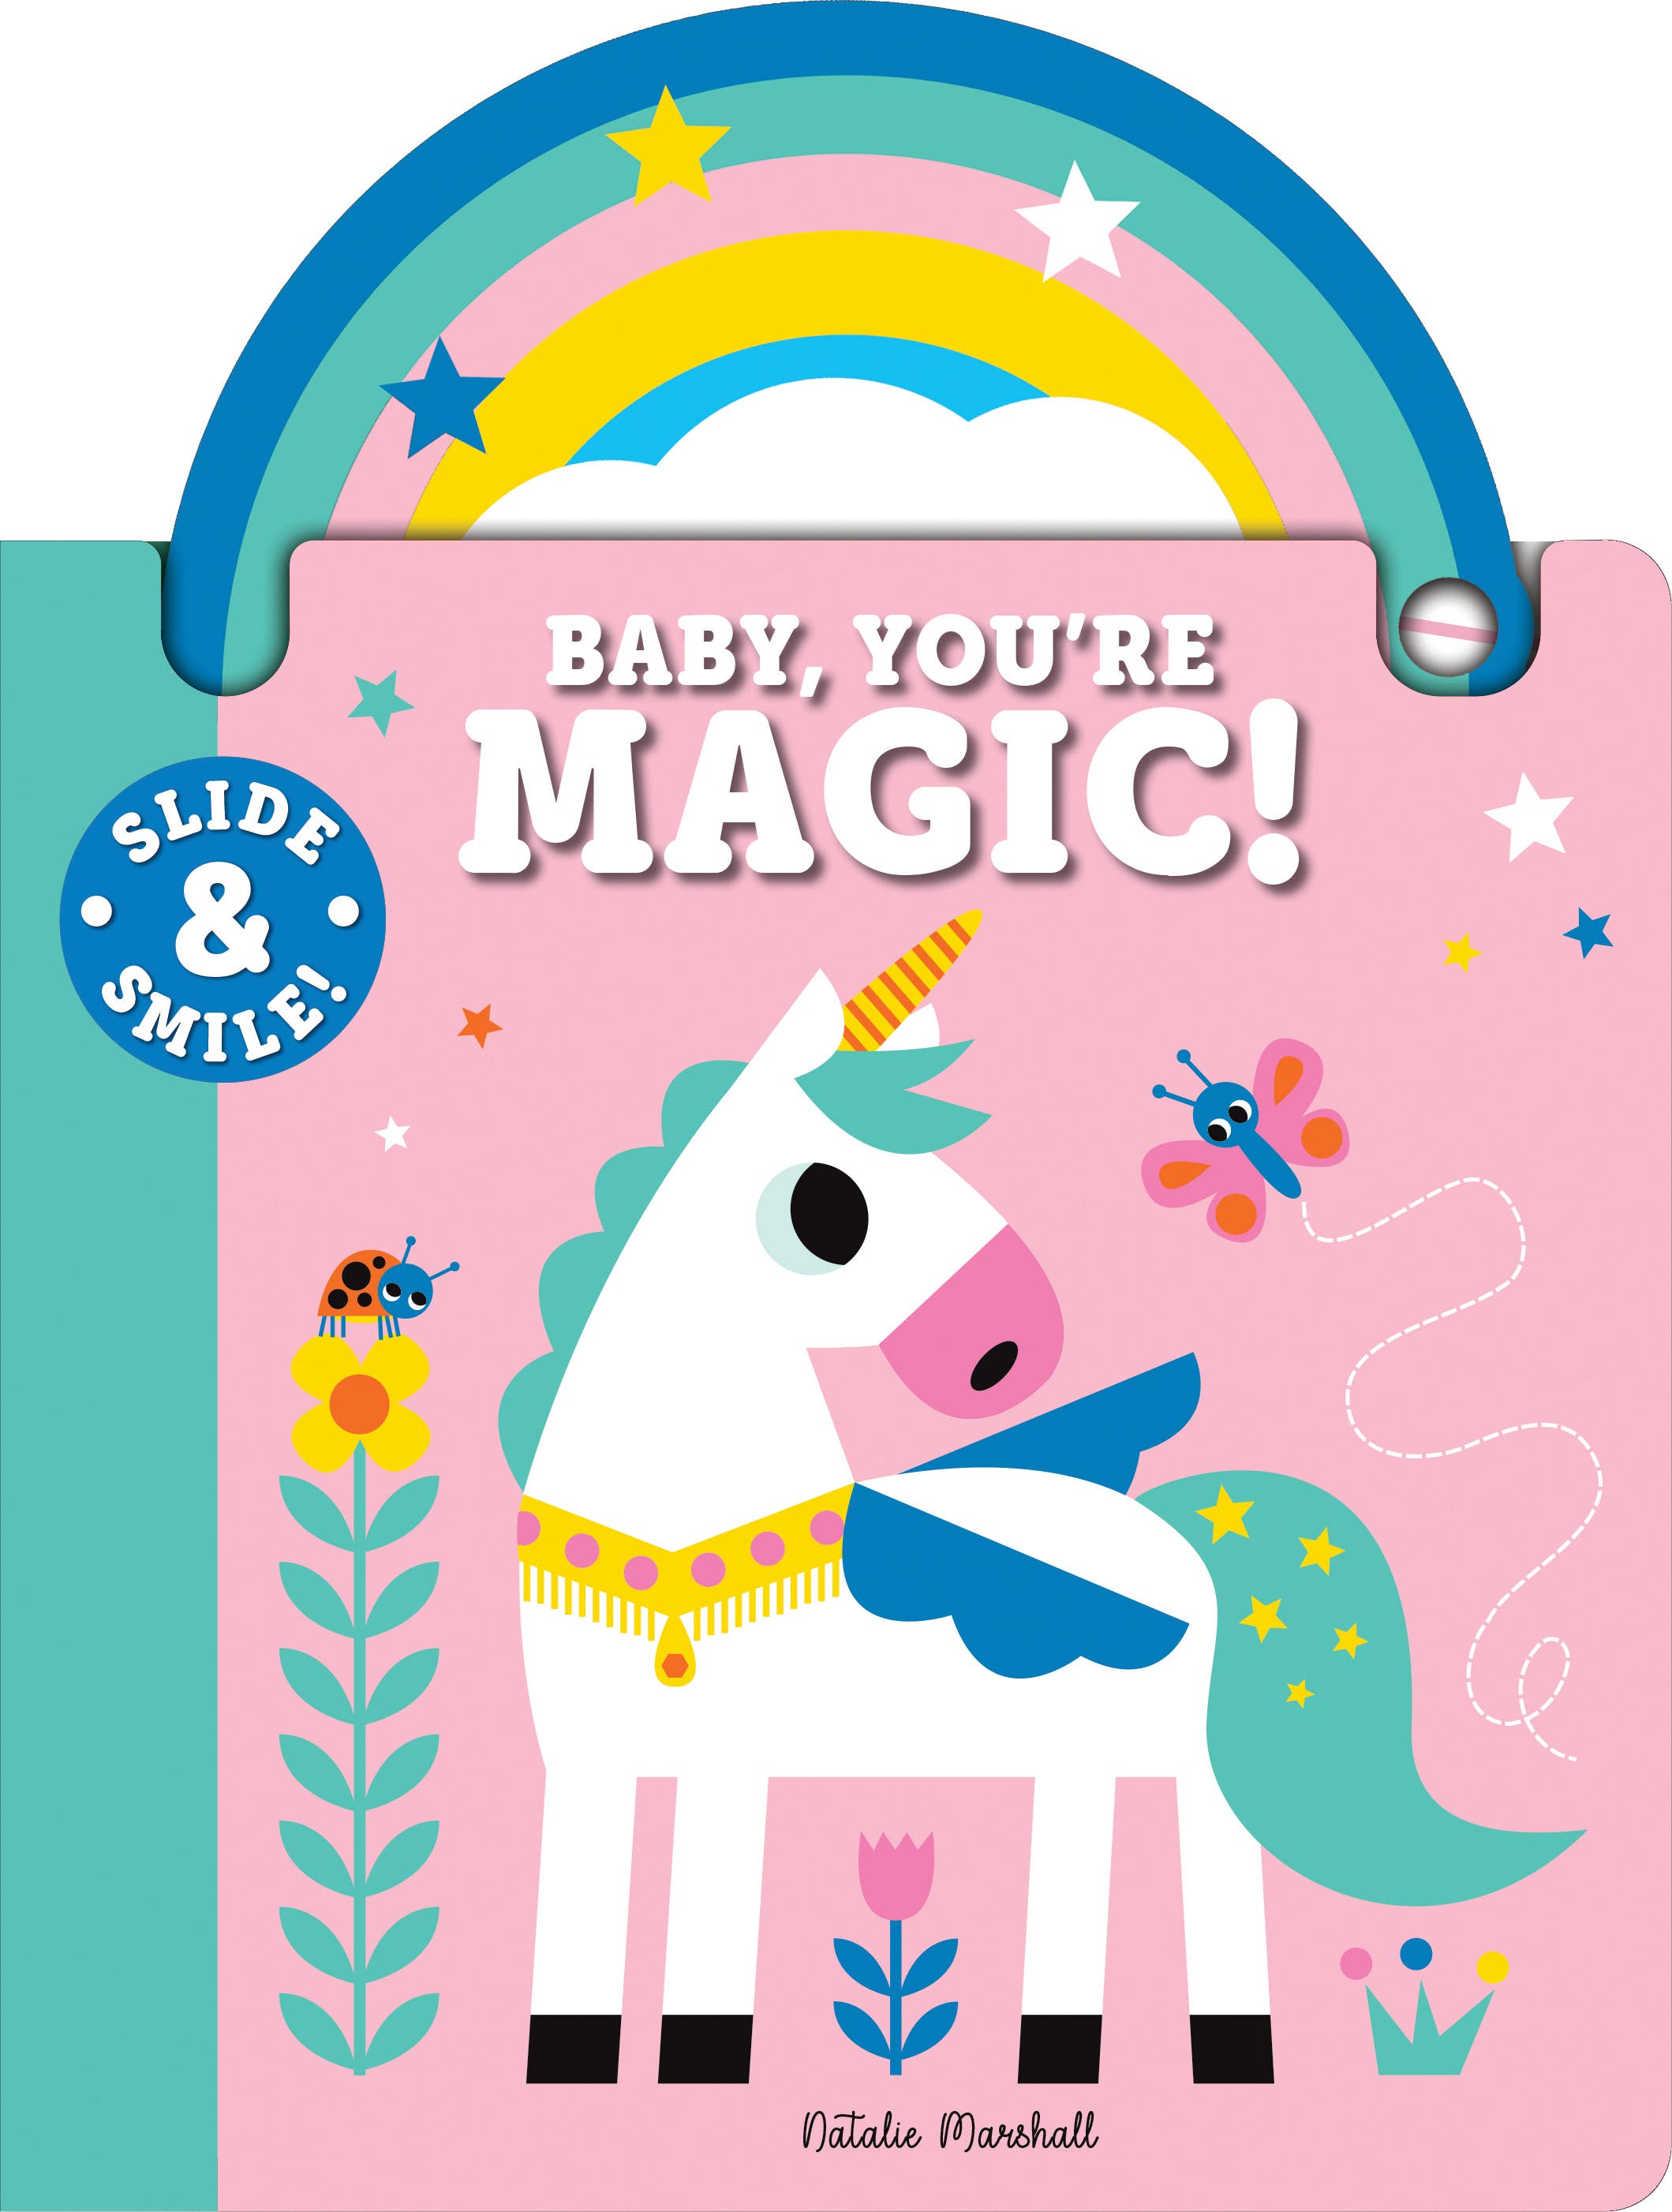 Slide and Smile: Baby, You're Magic! Board Book